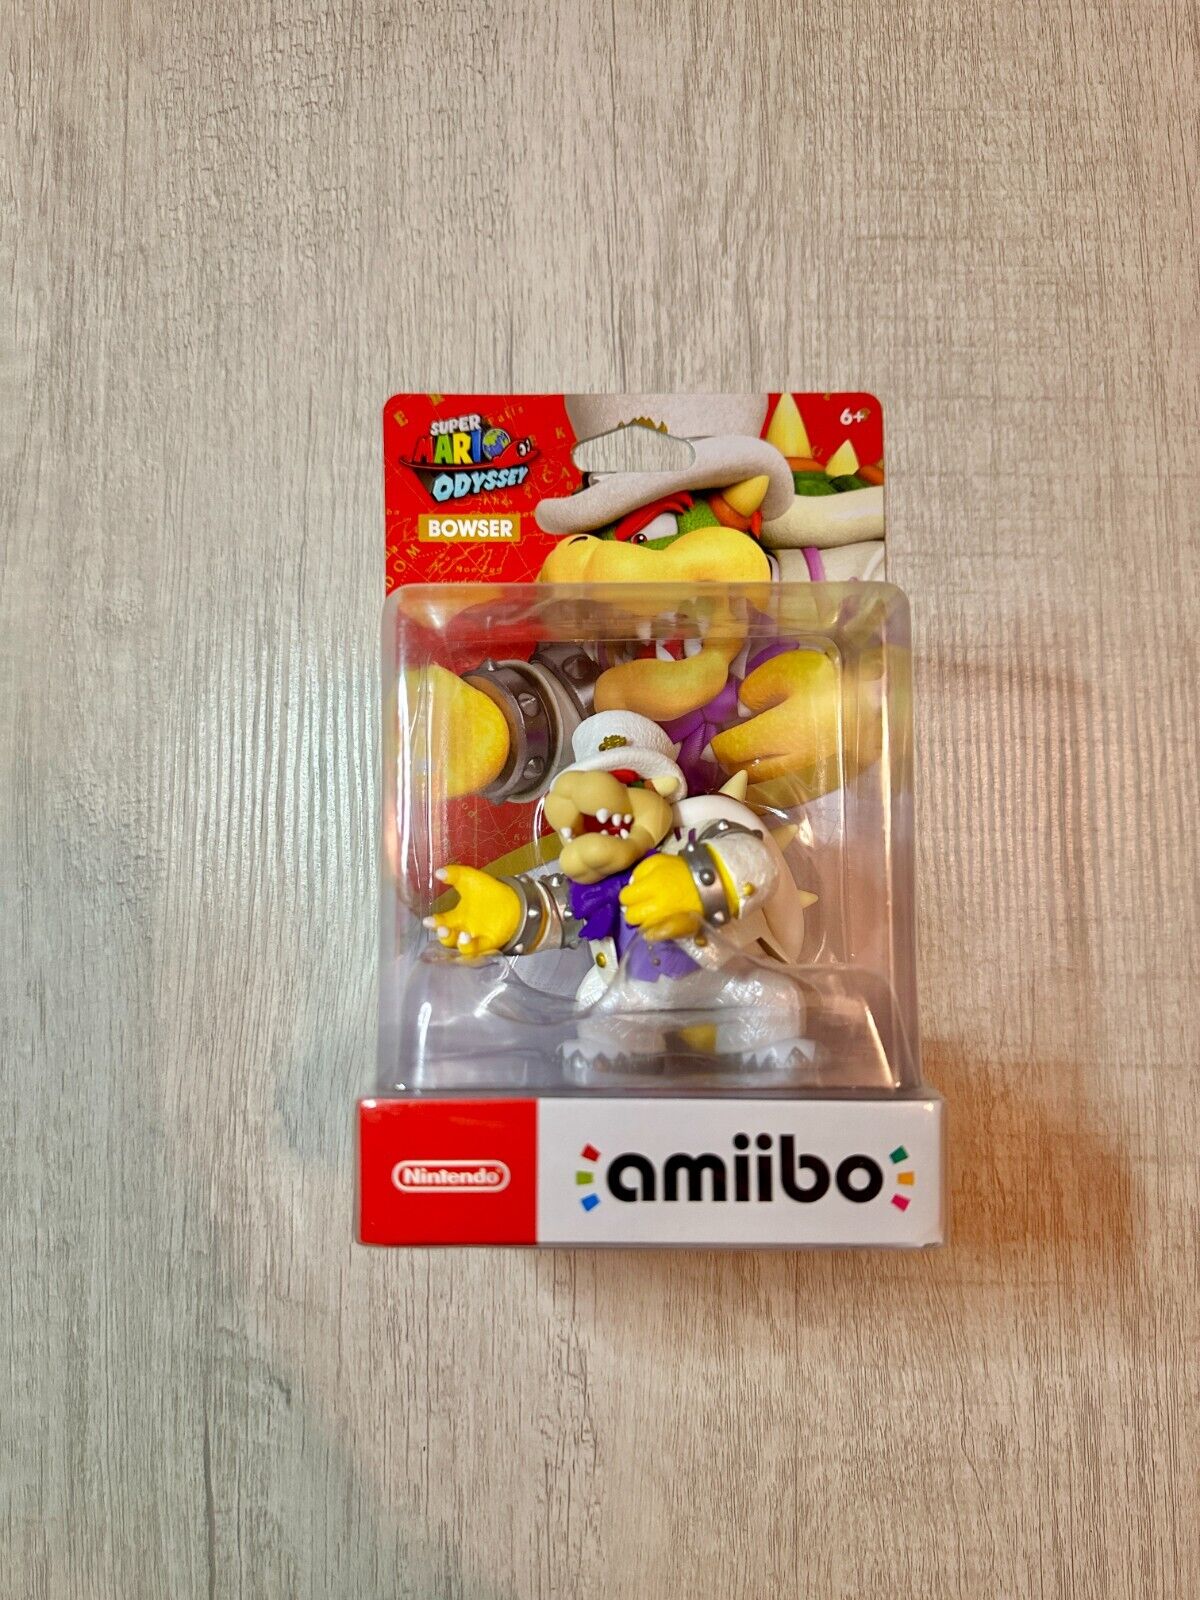 Authentic Nintendo Super Mario Odyssey Bowser Amiibo Figure NEW Official Sealed